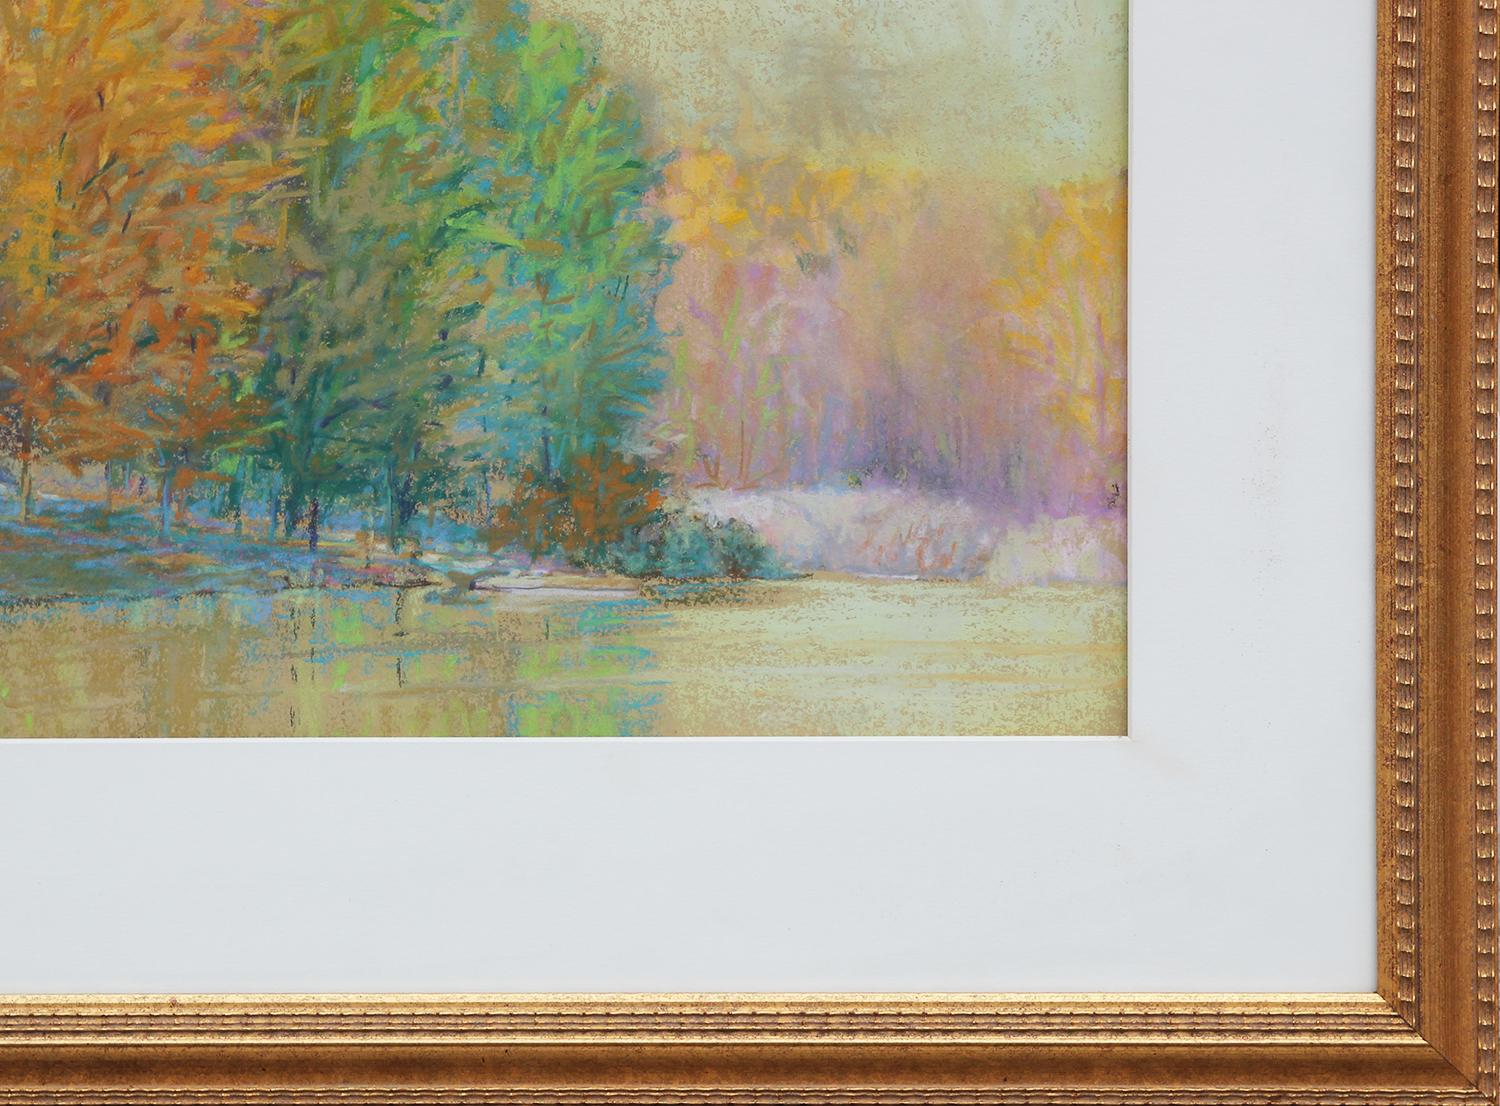 Abstract impressionist oil pastel landscape by Colorado artist, Ken Elliott. Yellow and green pastel toned drawing depicting a lakeside with glowing trees in autumn. Framed and matted in a gold frame. Signed by artist at the bottom left.

Dimensions